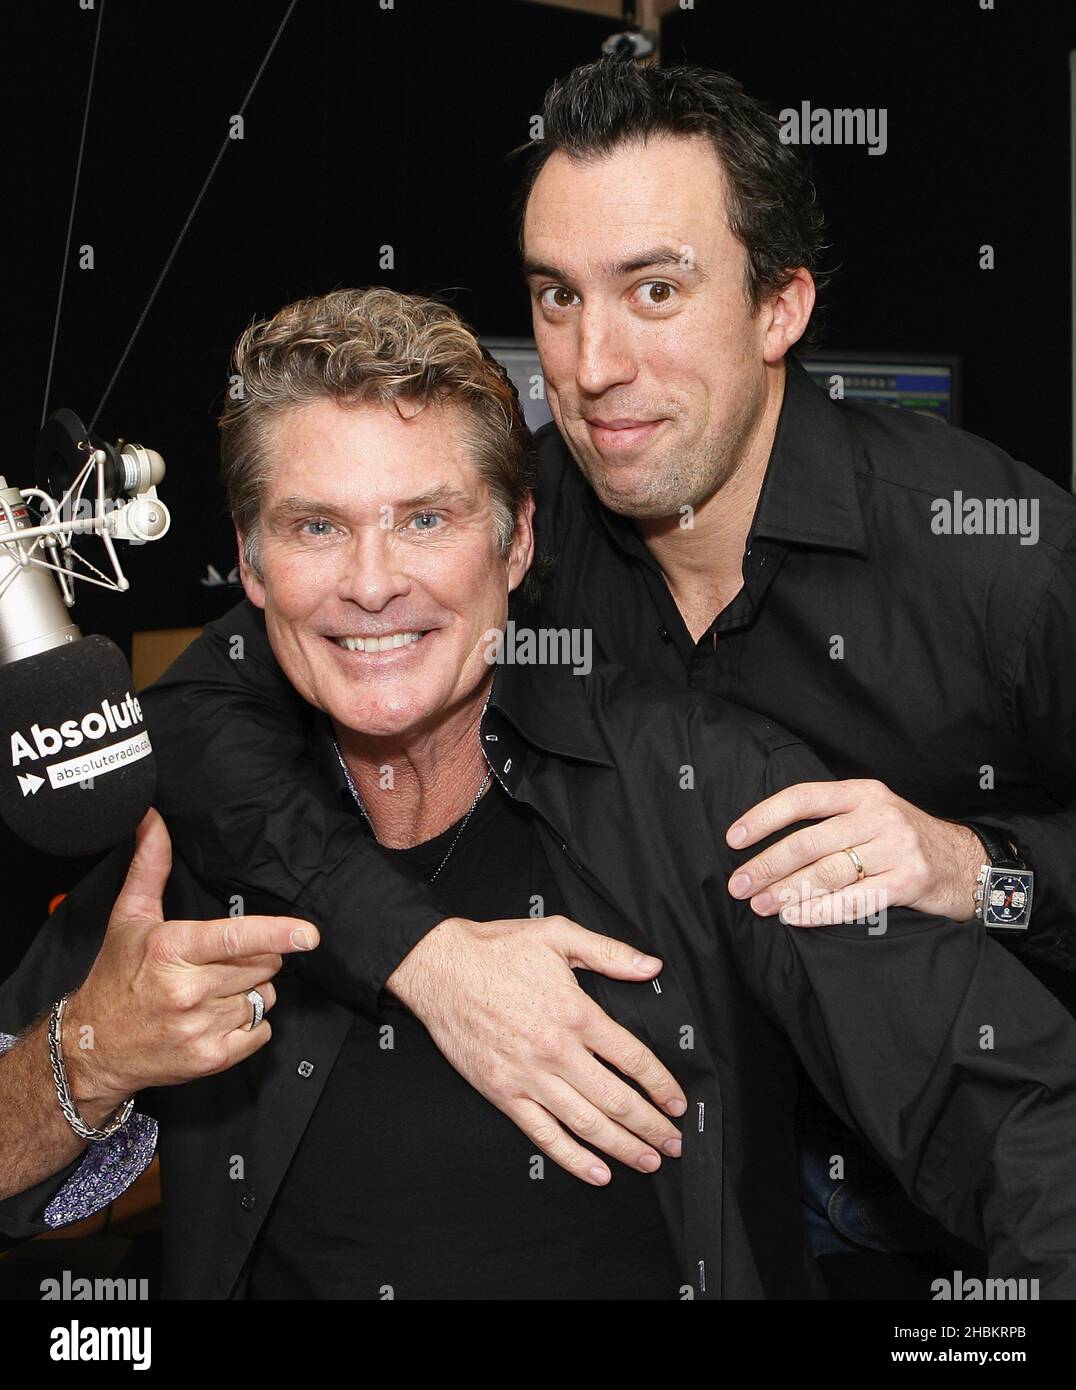 David Hasselhoff mit Christian O'Connell bei Absolute Radio, London, am 28,2009. September. Stockfoto